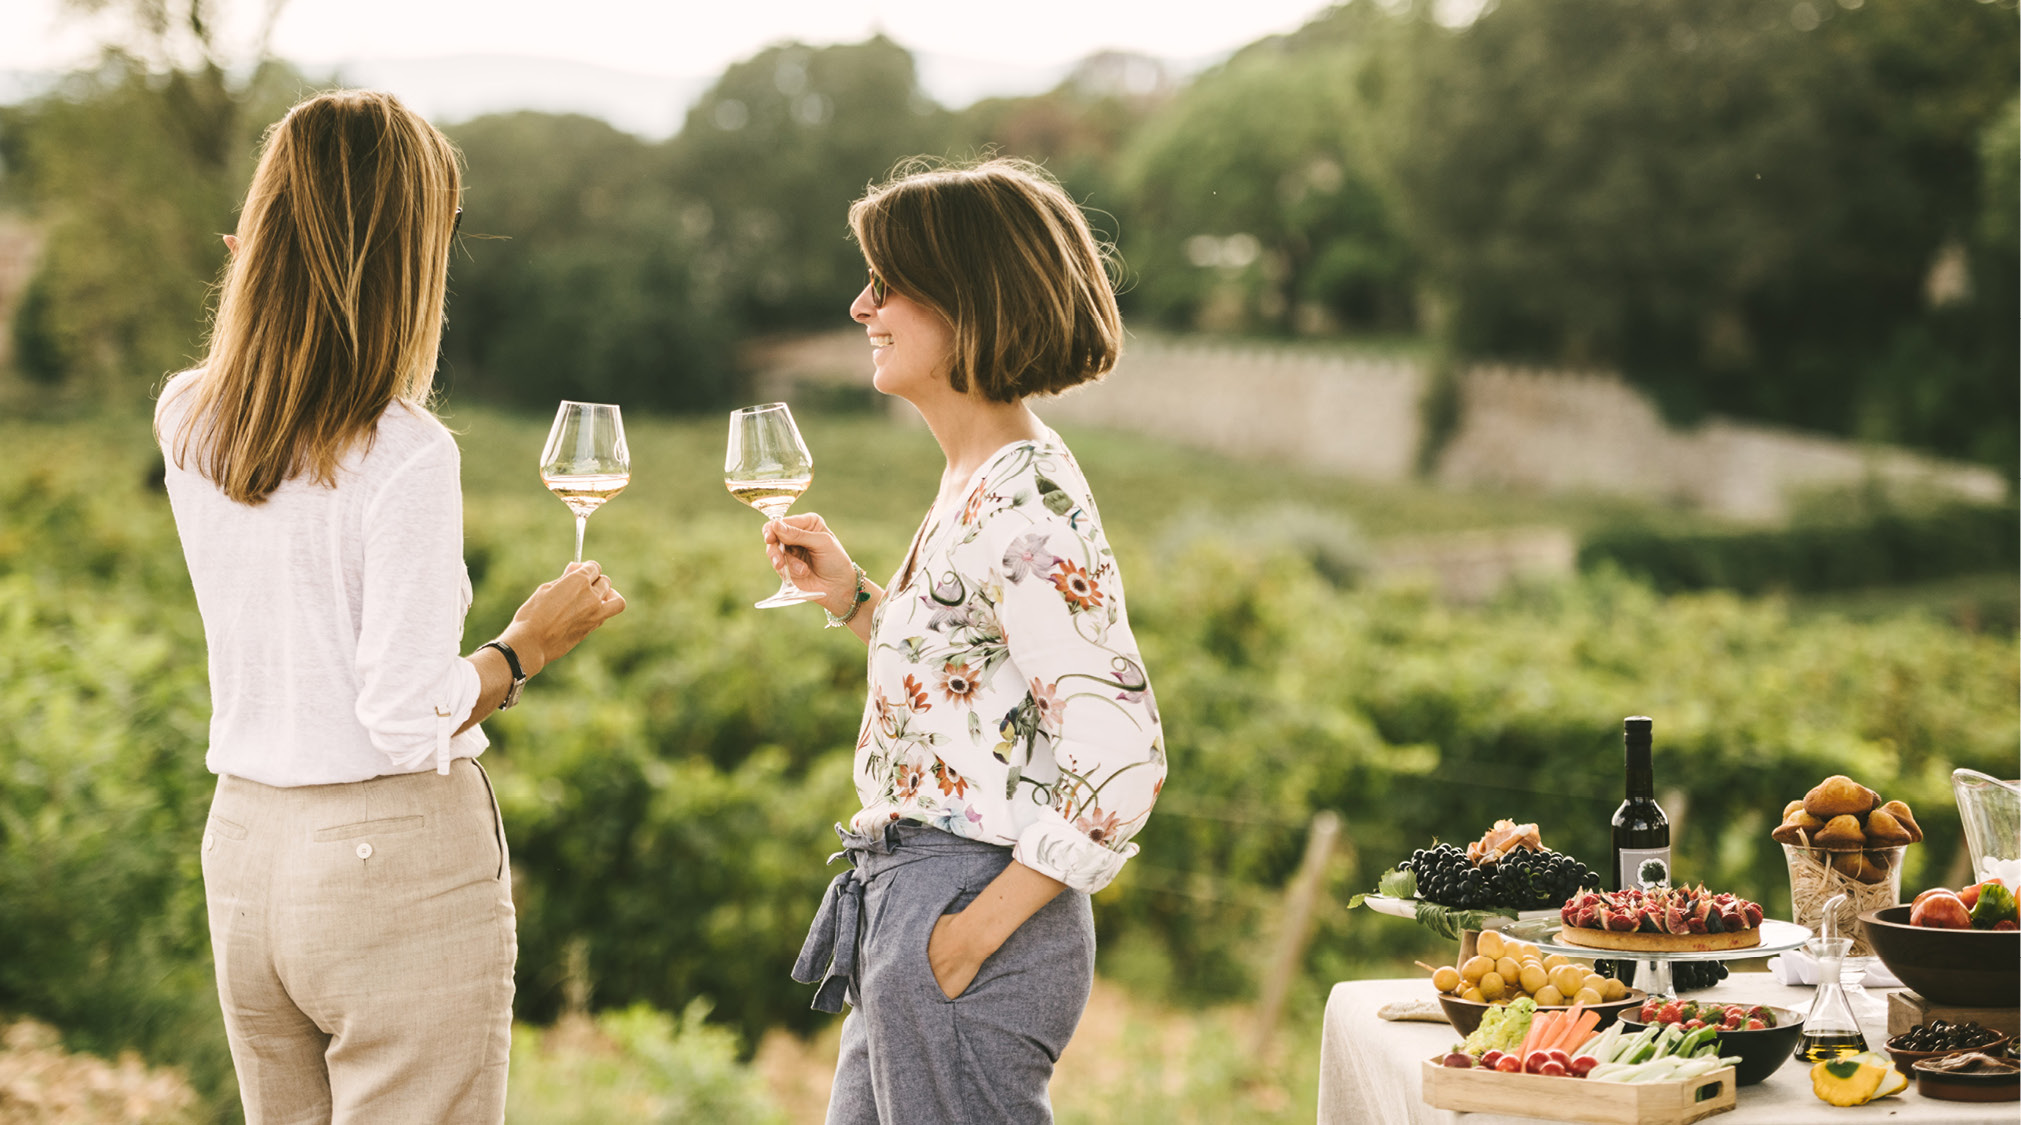 Two women drink a glass of white wine while standing among vineyards and private picnic